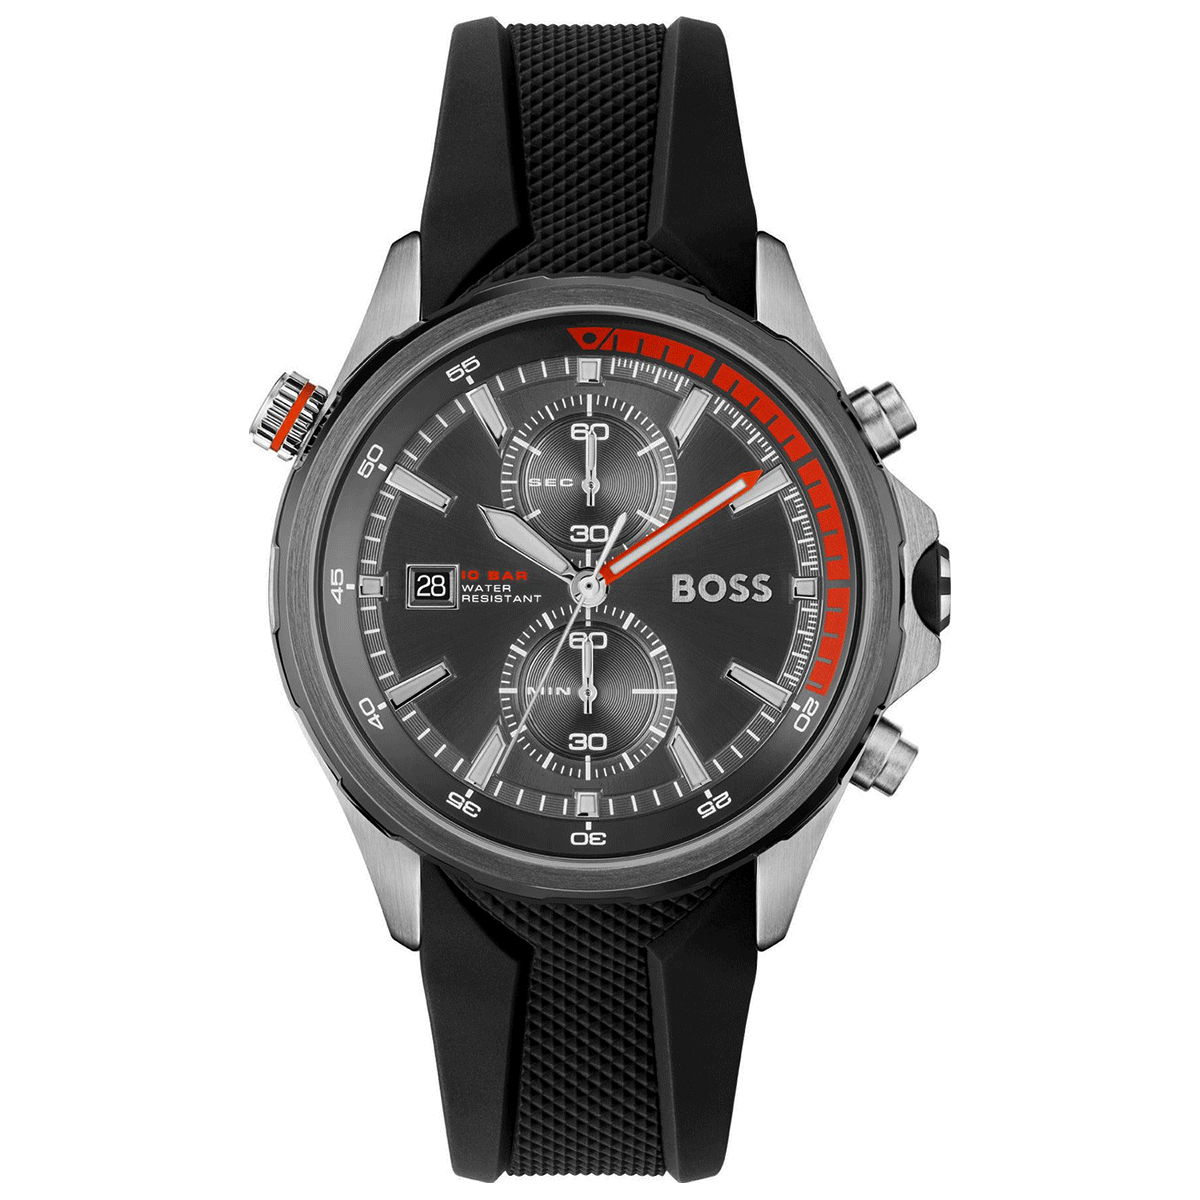 Black effect chronographs watch with textured silicone strap